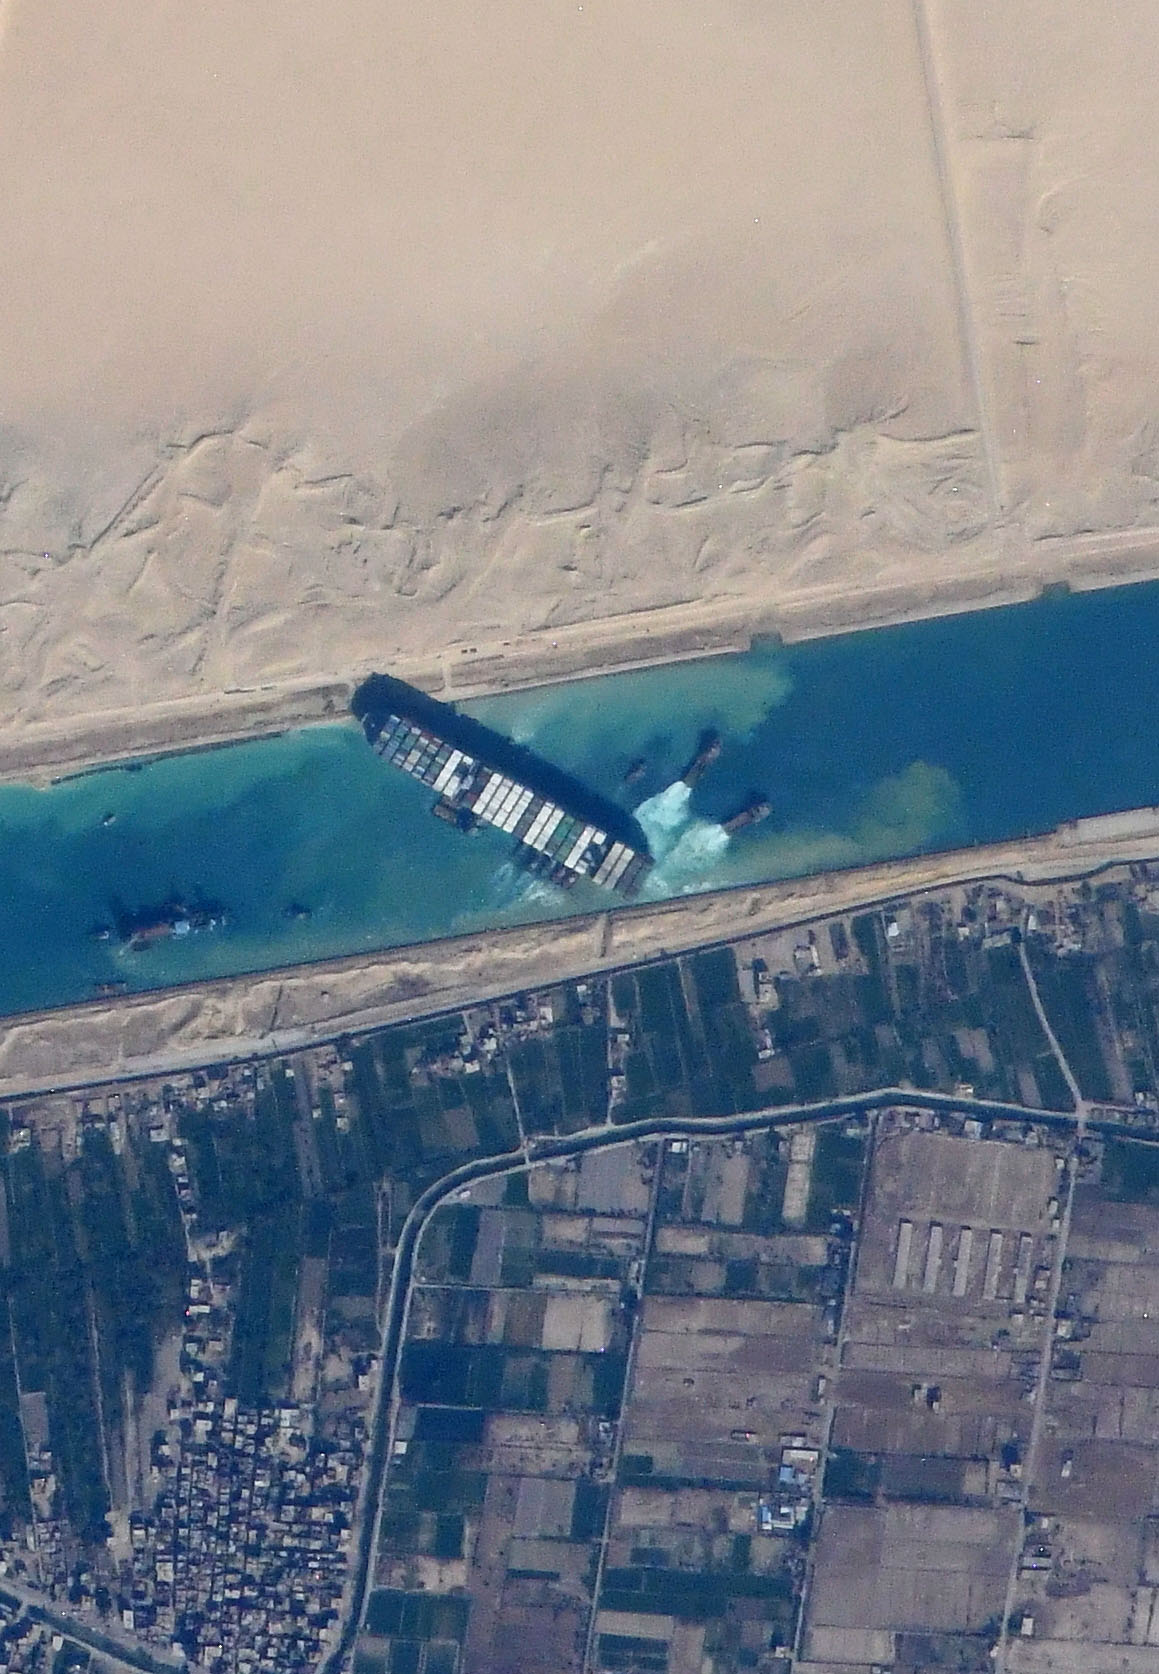 ship blocking a canal, viewed from above